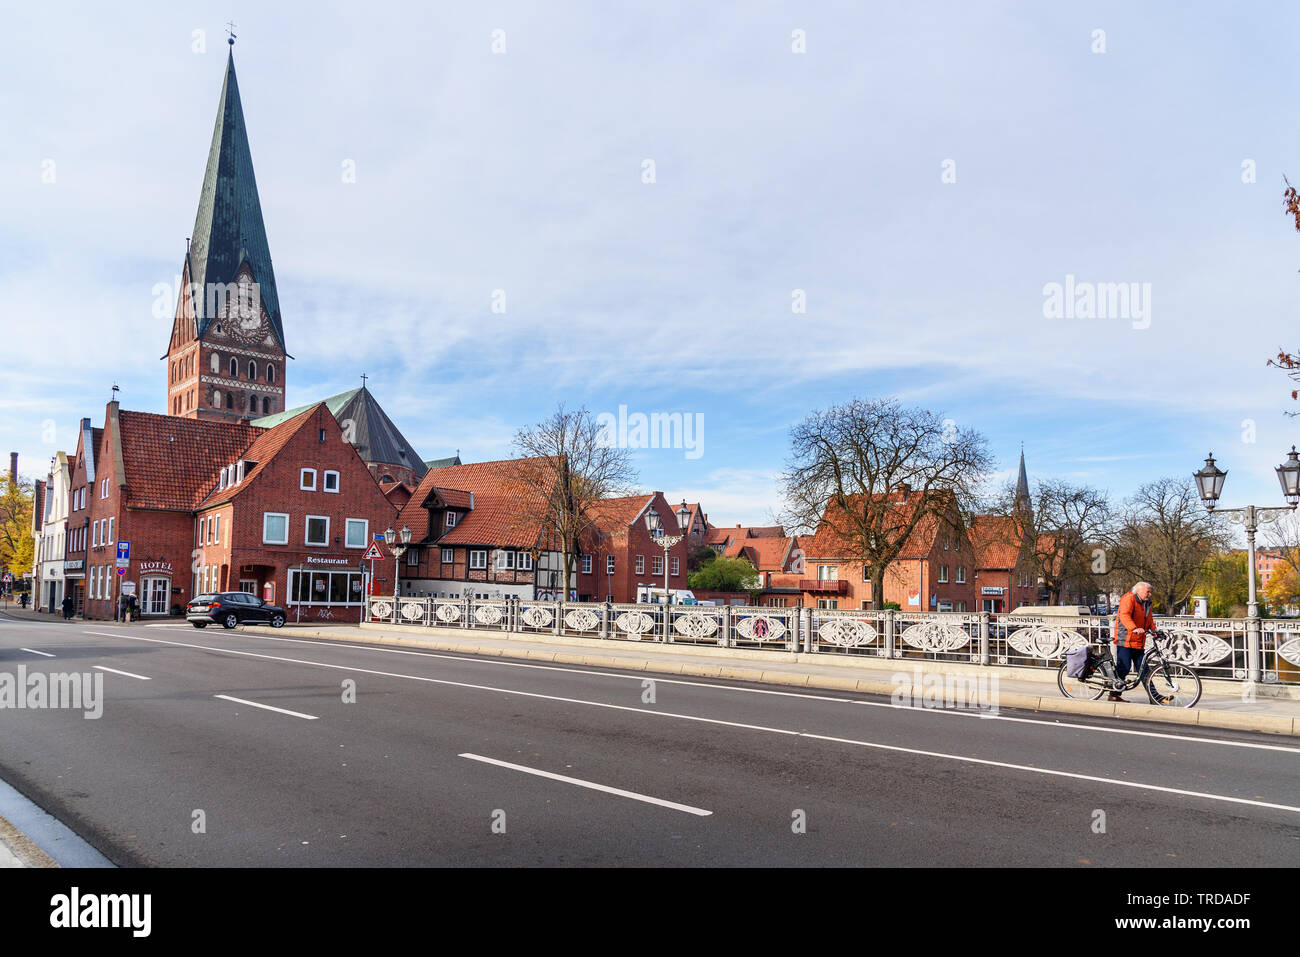 Luneburg, Germany - November 06, 2018: View of Cathedral and old historical houses from bridge over Ilmenau river in Luneburg Stock Photo